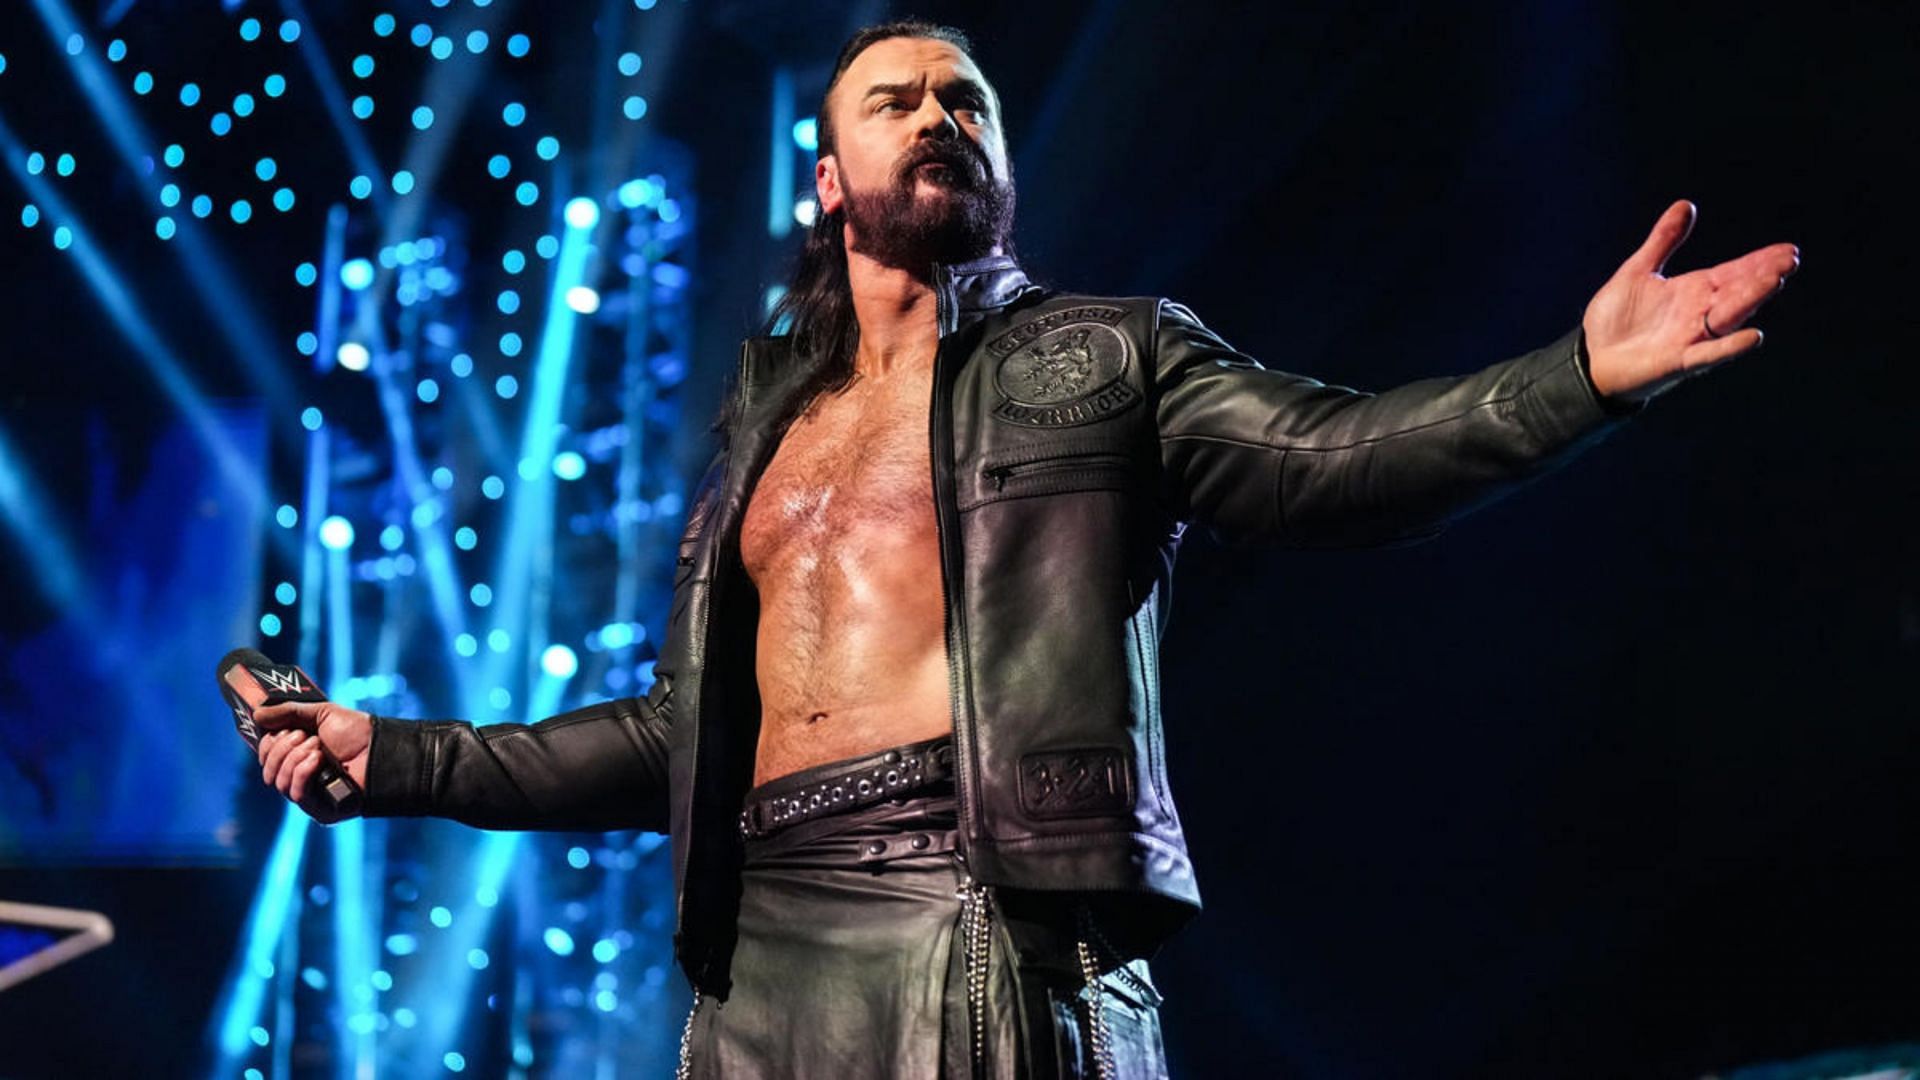 Will Drew McIntyre sign a new contract with WWE?